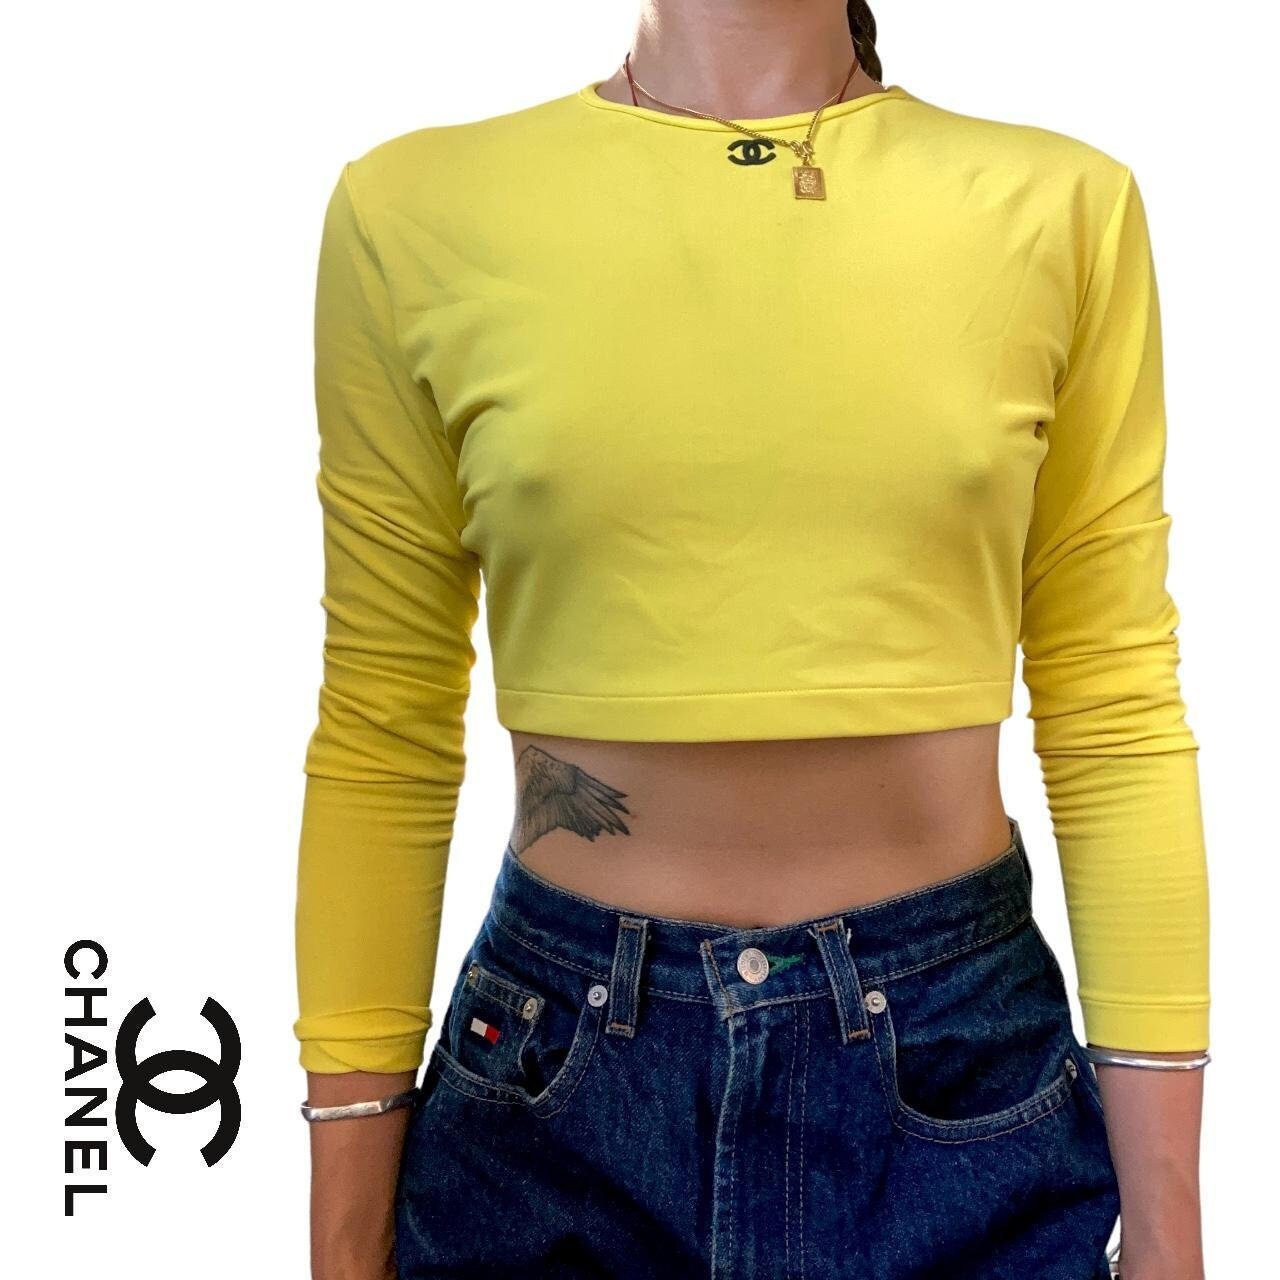 Chanel Cropped Top - 29 For Sale on 1stDibs  chanel vintage crop top,  chanel tube top, chanel crop tops